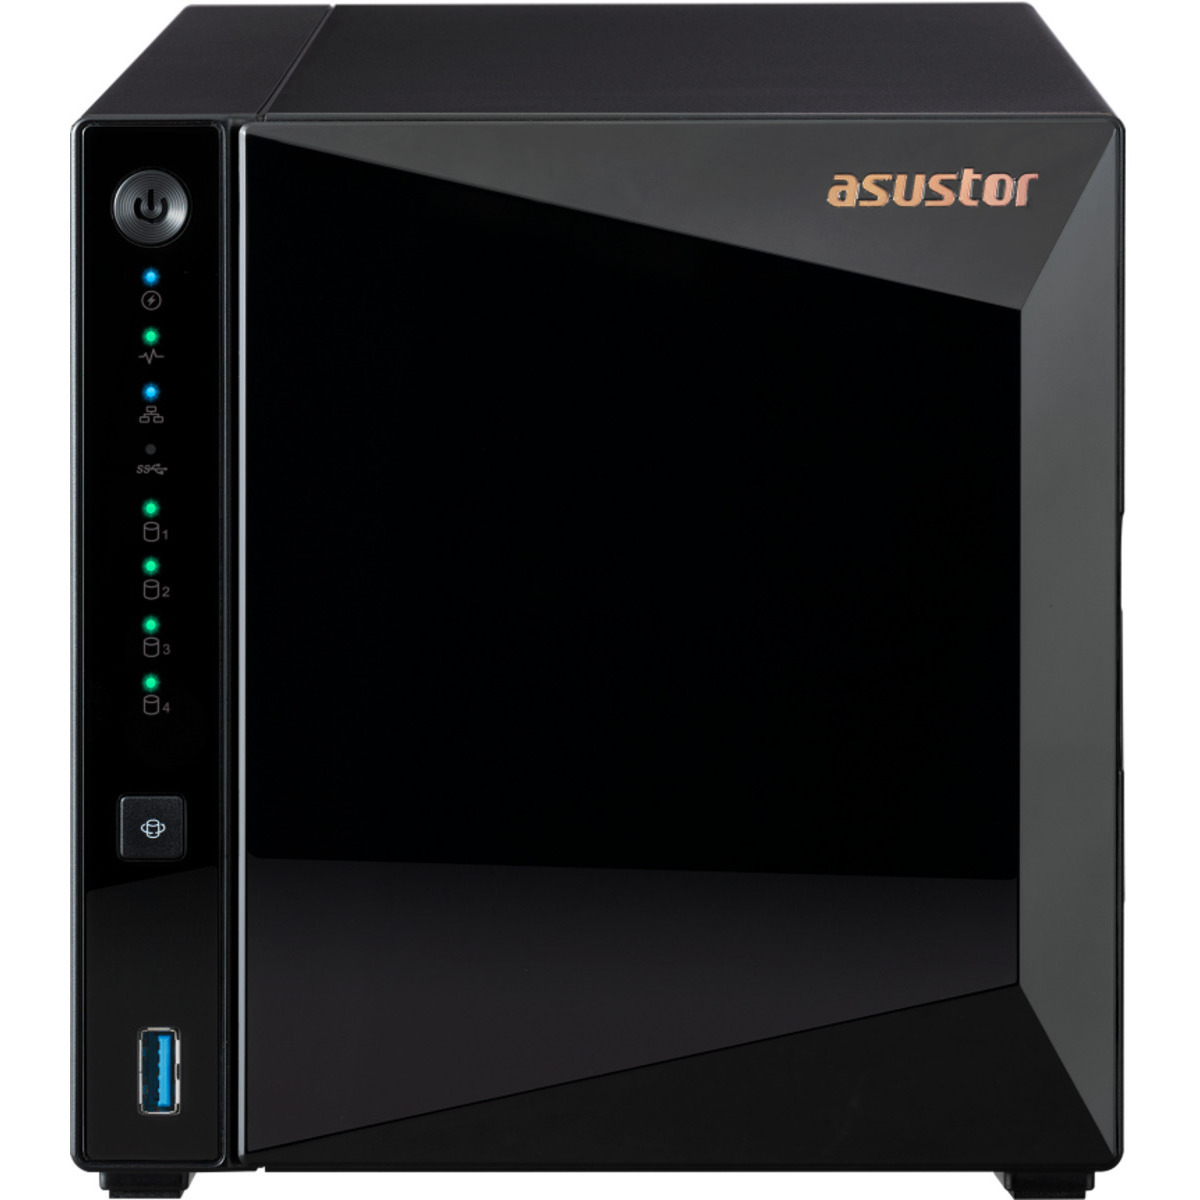 ASUSTOR DRIVESTOR 4 Pro Gen2 AS3304T v2 32tb 4-Bay Desktop Personal / Basic Home / Small Office NAS - Network Attached Storage Device 4x8tb Seagate EXOS 7E10 ST8000NM017B 3.5 7200rpm SATA 6Gb/s HDD ENTERPRISE Class Drives Installed - Burn-In Tested - ON SALE DRIVESTOR 4 Pro Gen2 AS3304T v2